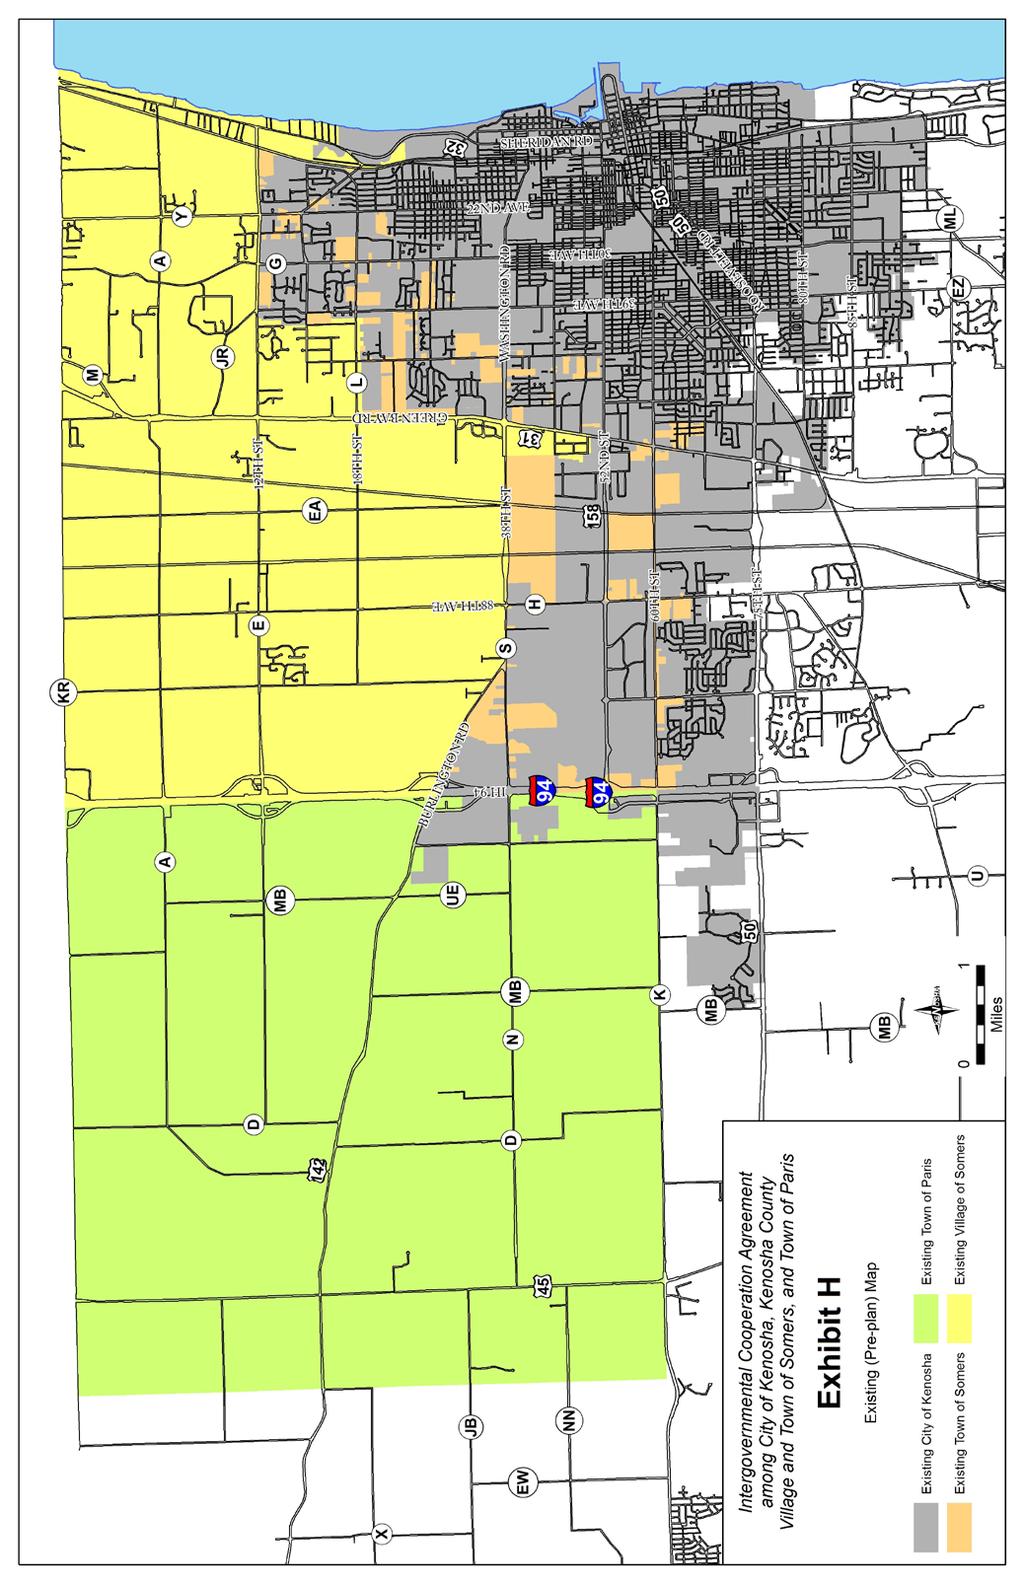 100 Existing Town of Paris Existing Village of Somers Existing City of Kenosha Existing Town of Somers Existing (Pre-plan) Map Exhibit H